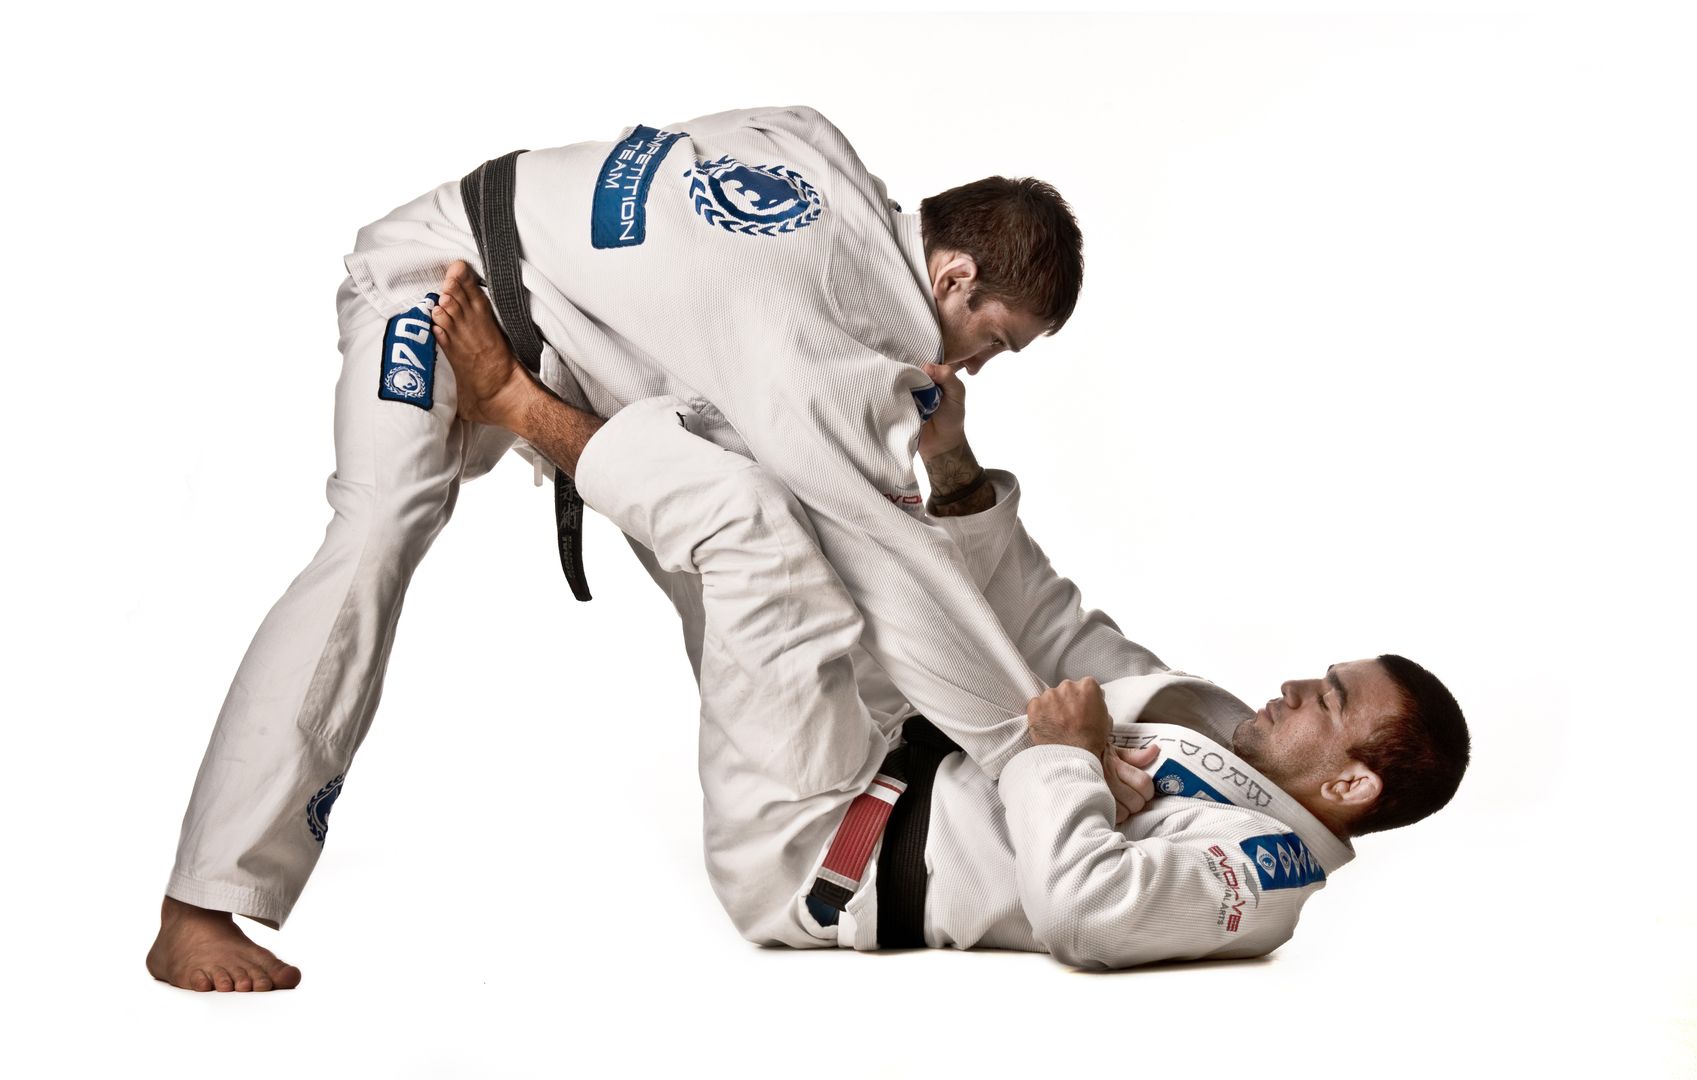 BJJ Submissions: The Importance, Categories, and Tapping